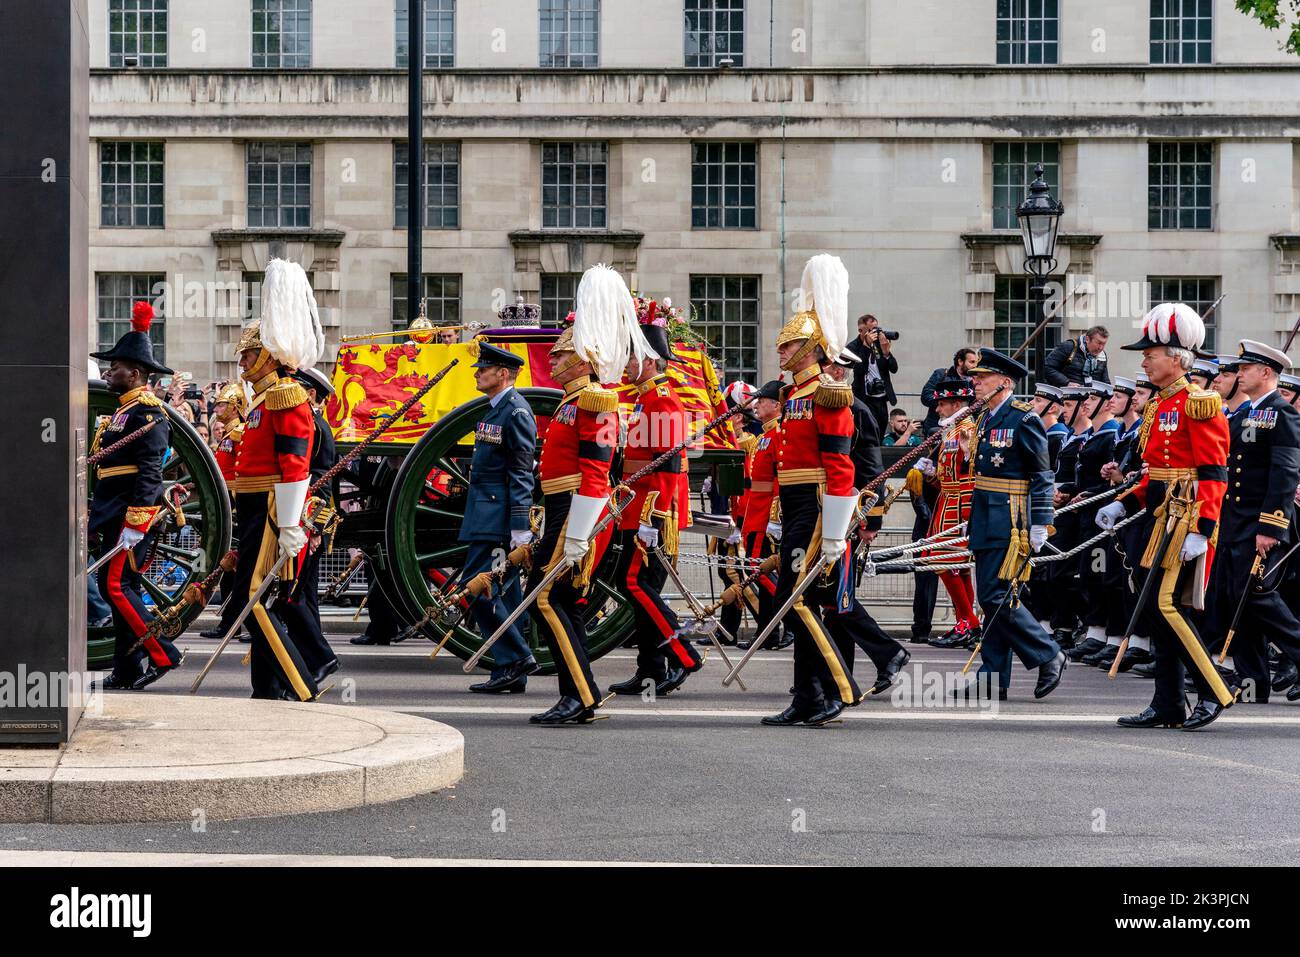 The Funeral Procession Of Queen Elizabeth II Travels Up Whitehall On The Way To Wellington Arch, London, UK. Stock Photo